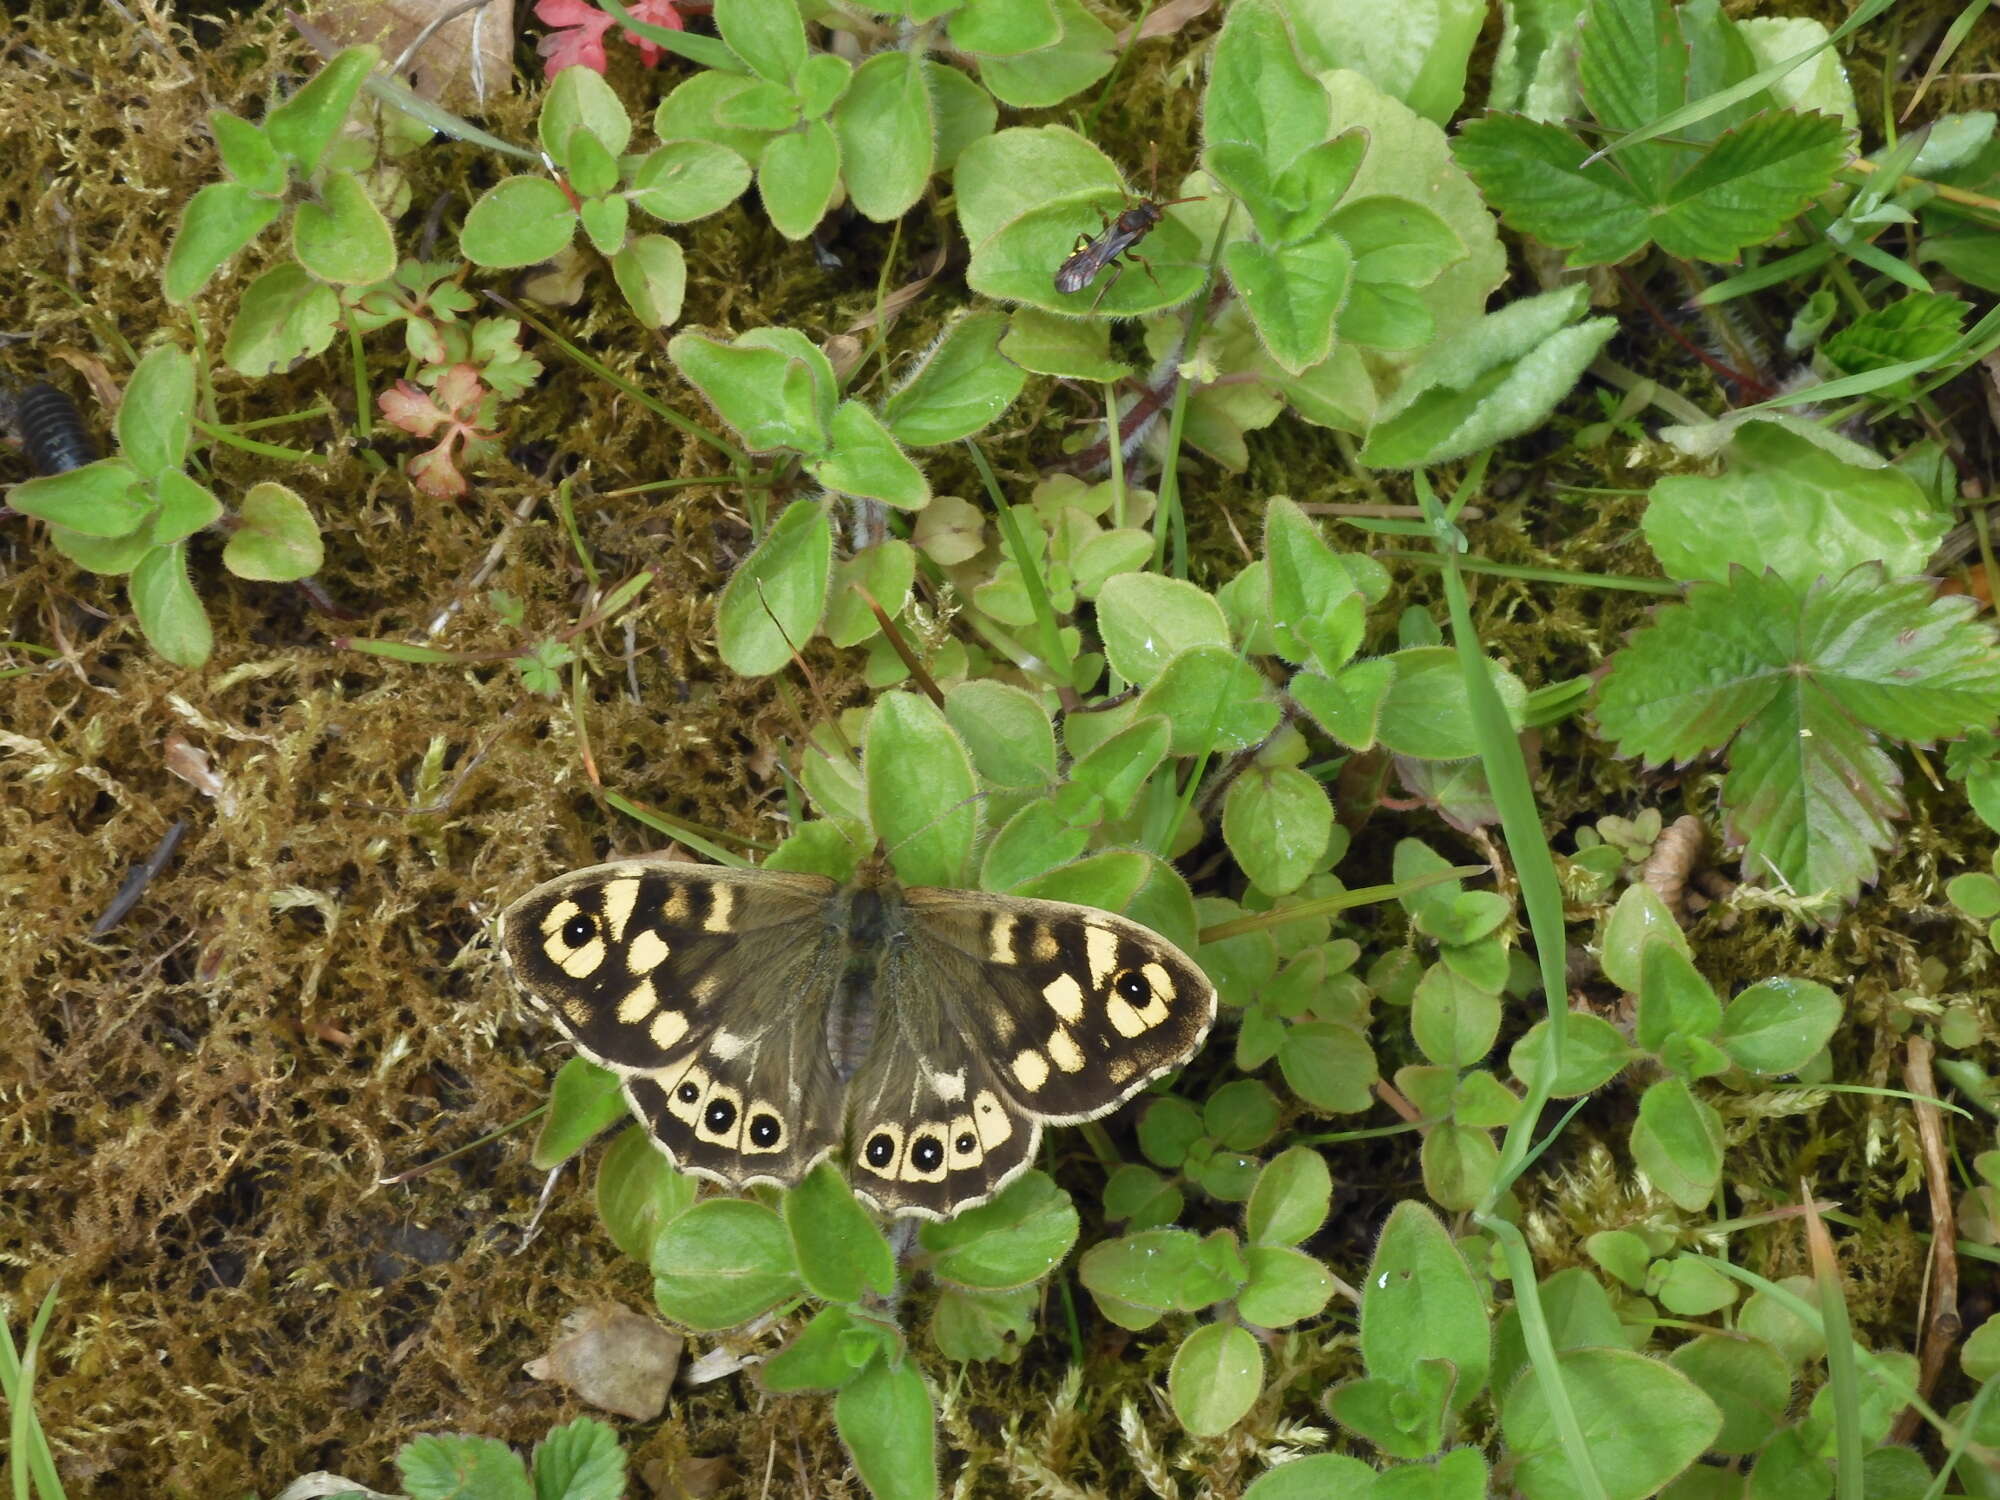 Proving that we were developing a real woodland habitat, 2005 produced our next resident species - the Speckled Wood, and an ovipositing female at that!